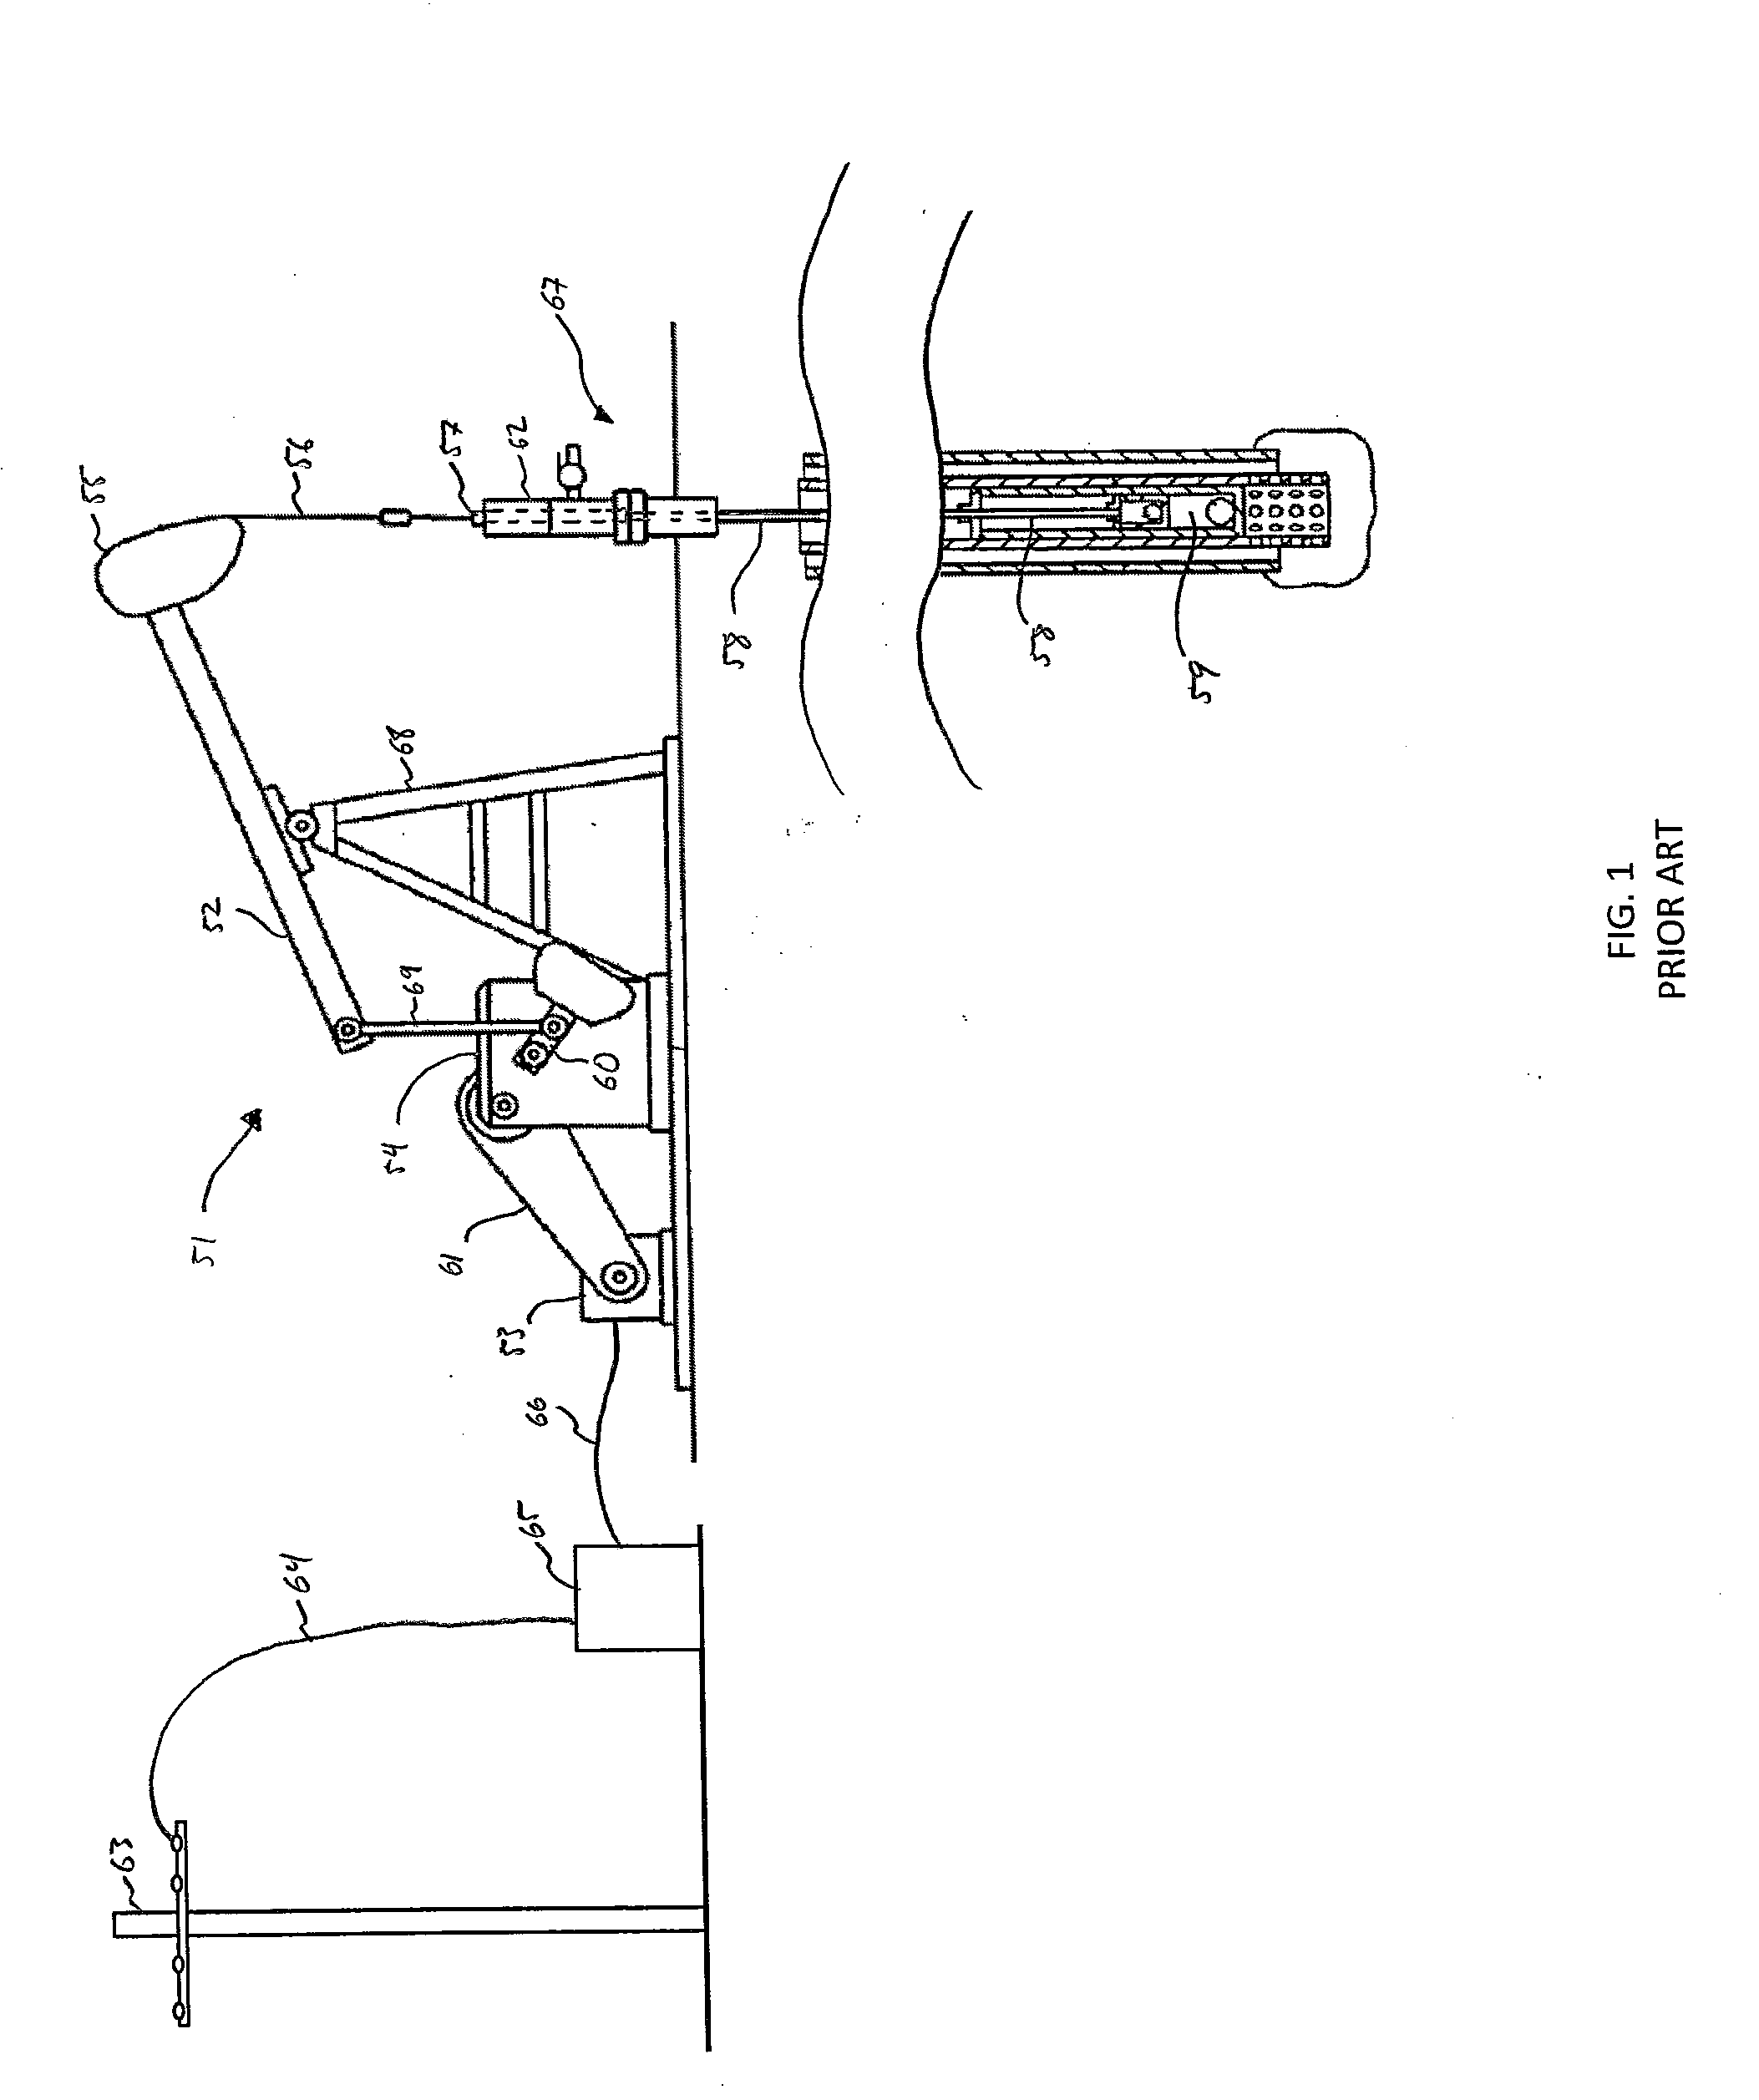 System, Method and Apparatus for Computing, Monitoring, Measuring, Optimizing and Allocating Power and Energy for a Rod Pumping System